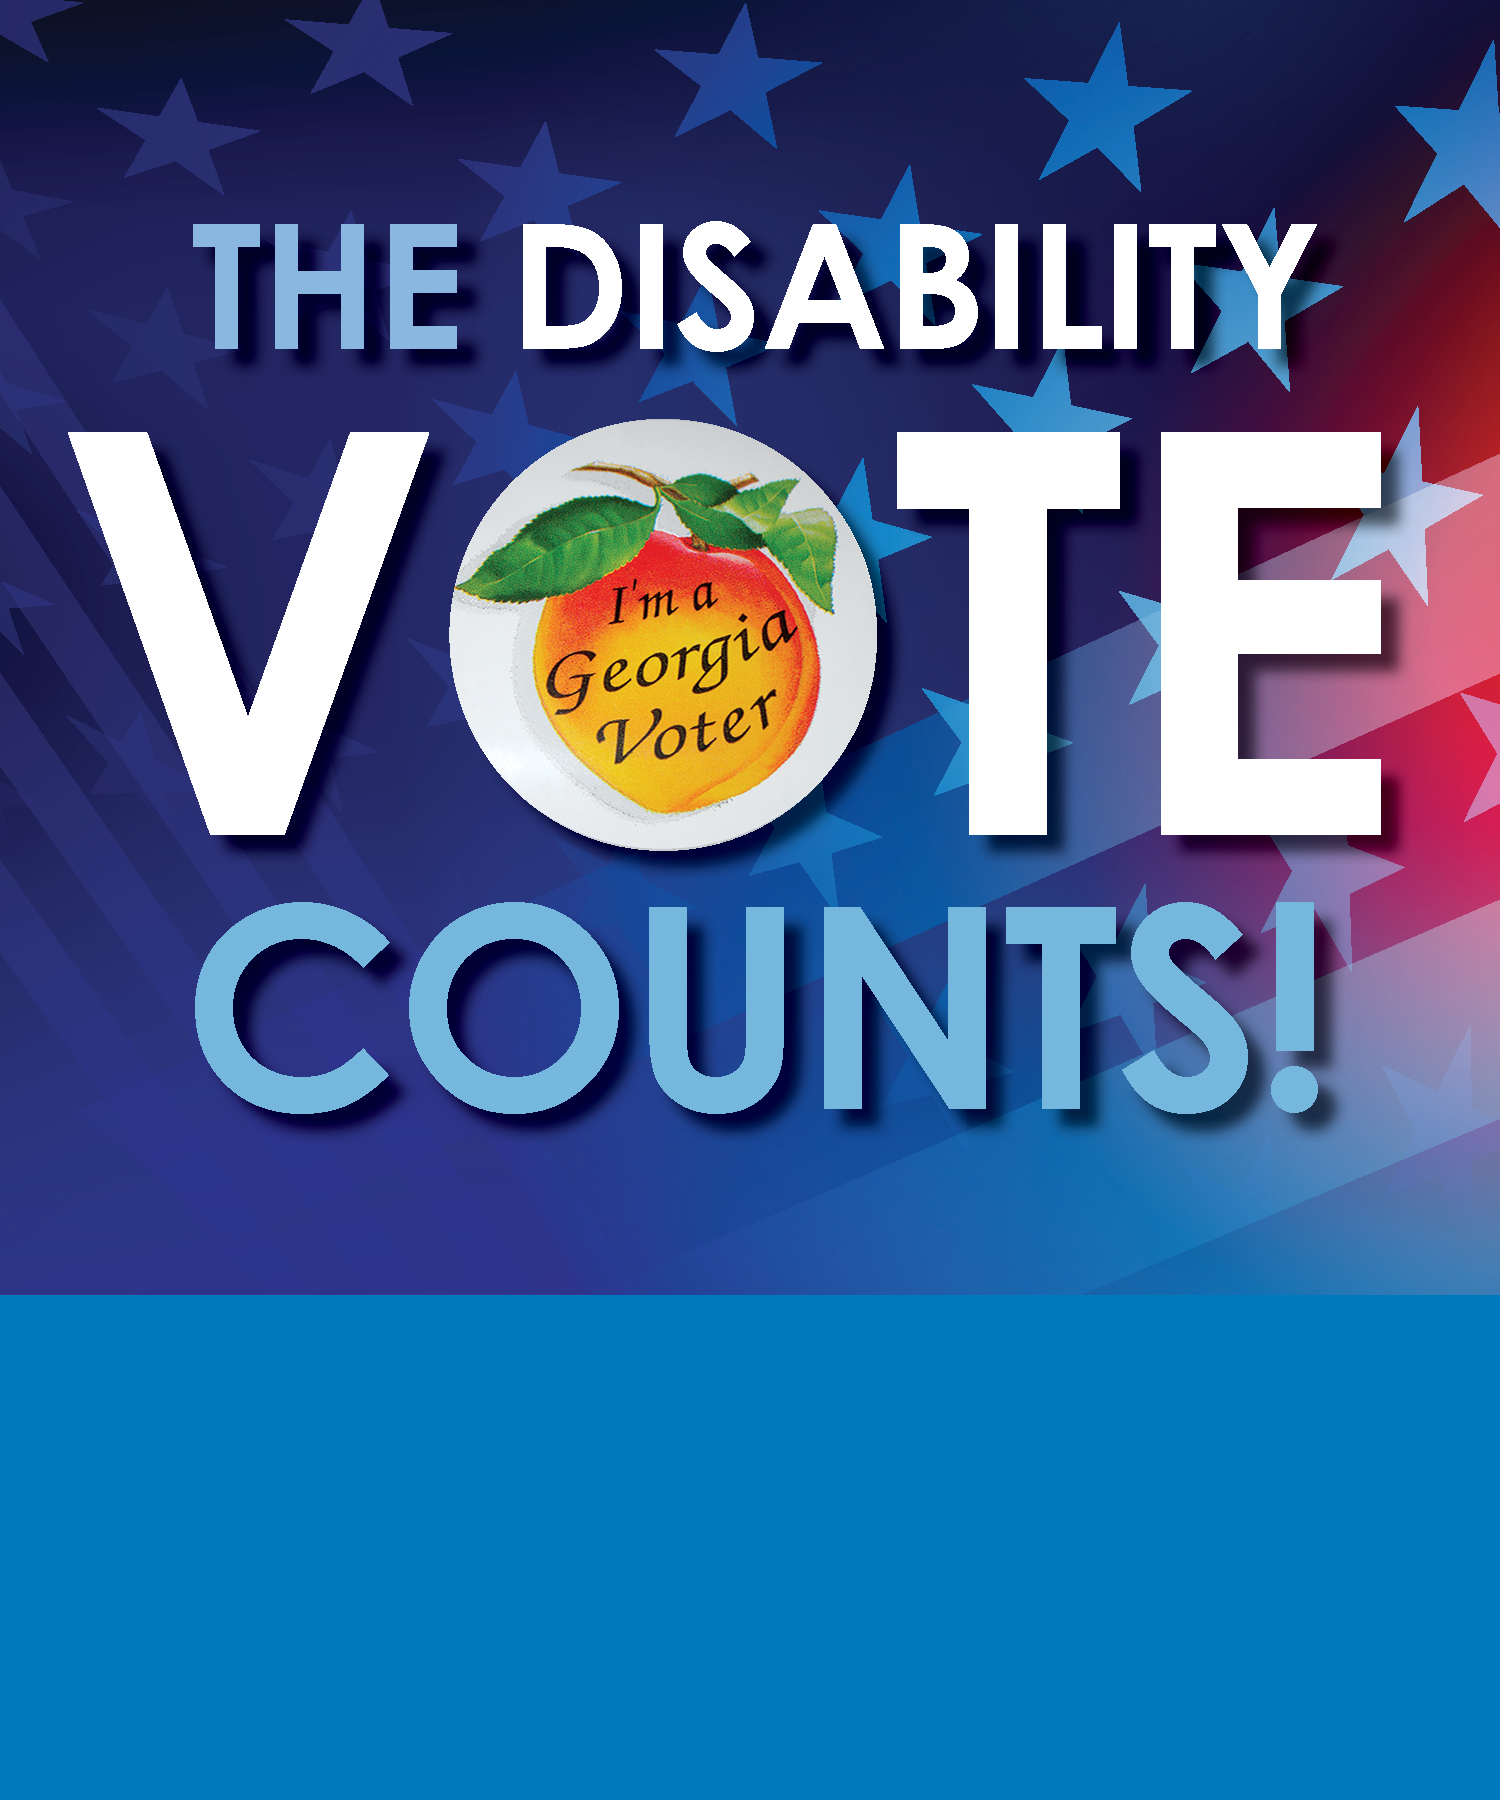 Voting is one of our most important rights and civic duties as citizens living in a democracy. In Georgia, more than one million people have disabilities and approximately 652,000 are of voting age. GCDD educated voters with disabilities with an informative guide before the November 2018 presidential election. Check out why the disability vote counted.